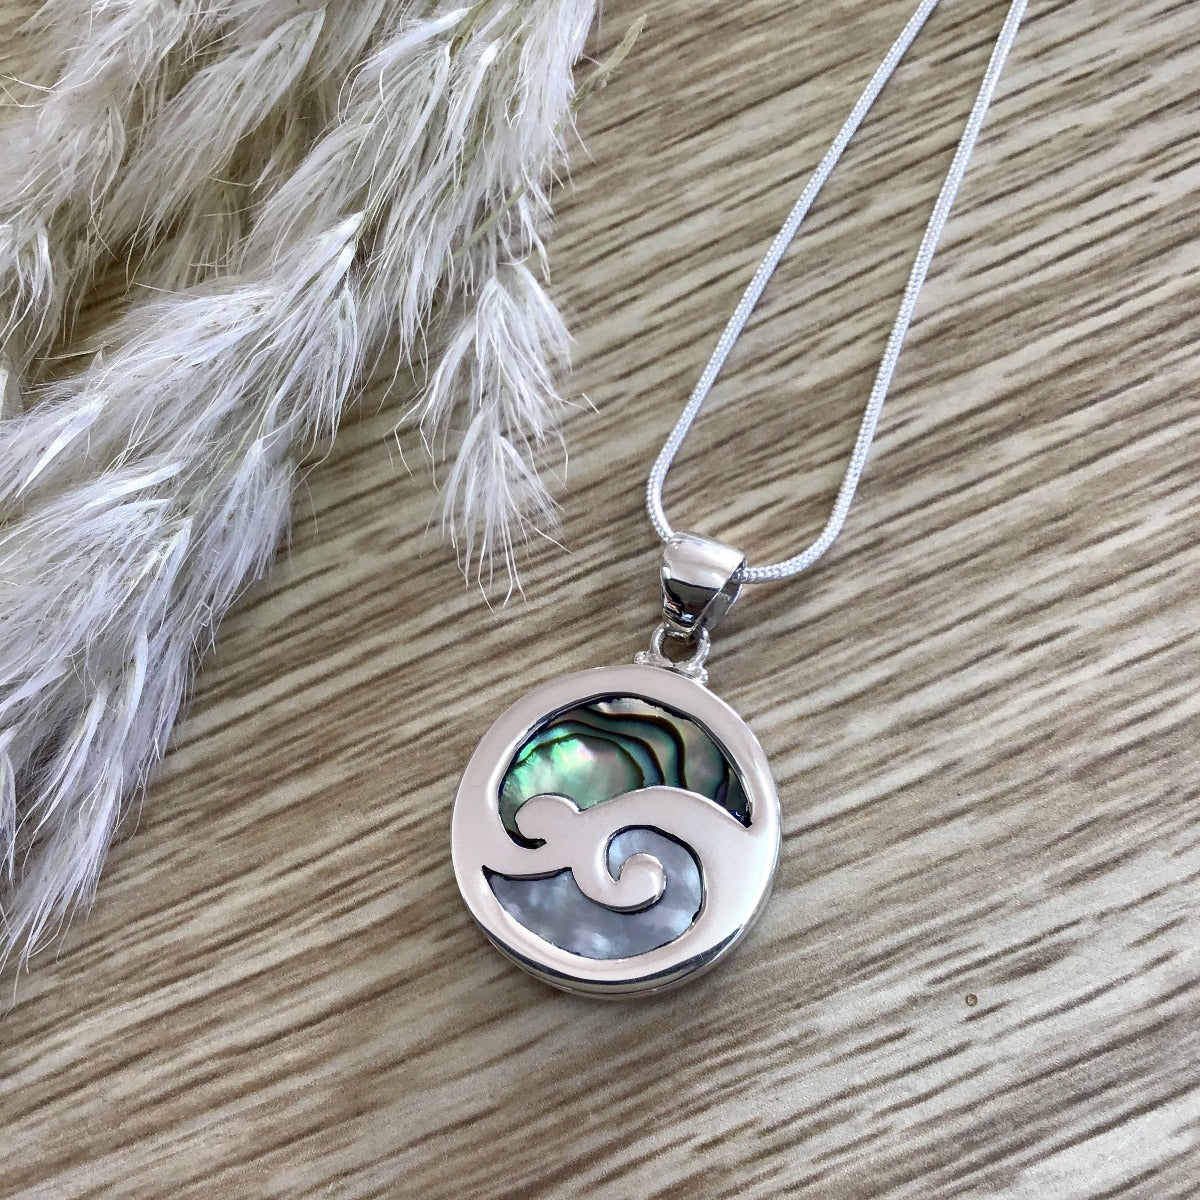 jade kiwi kaikoura sterling silver necklace pendant mother of pearl paua shell